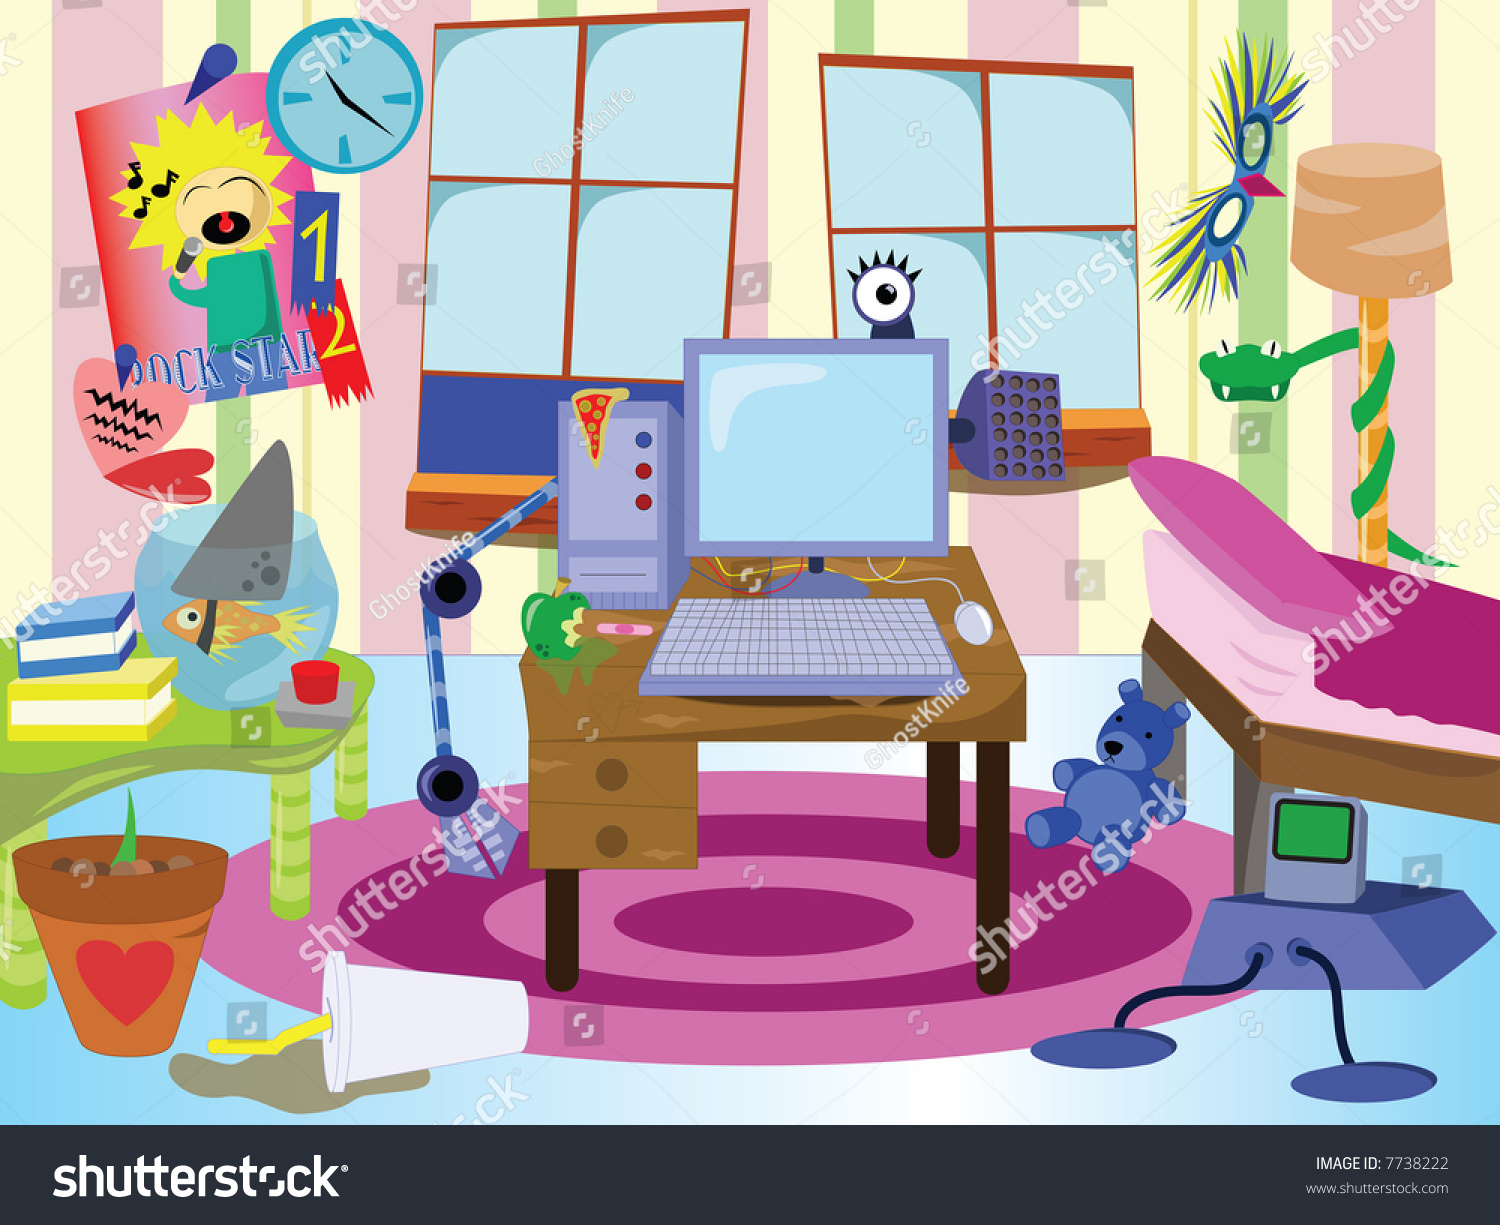 clipart messy room - photo #7